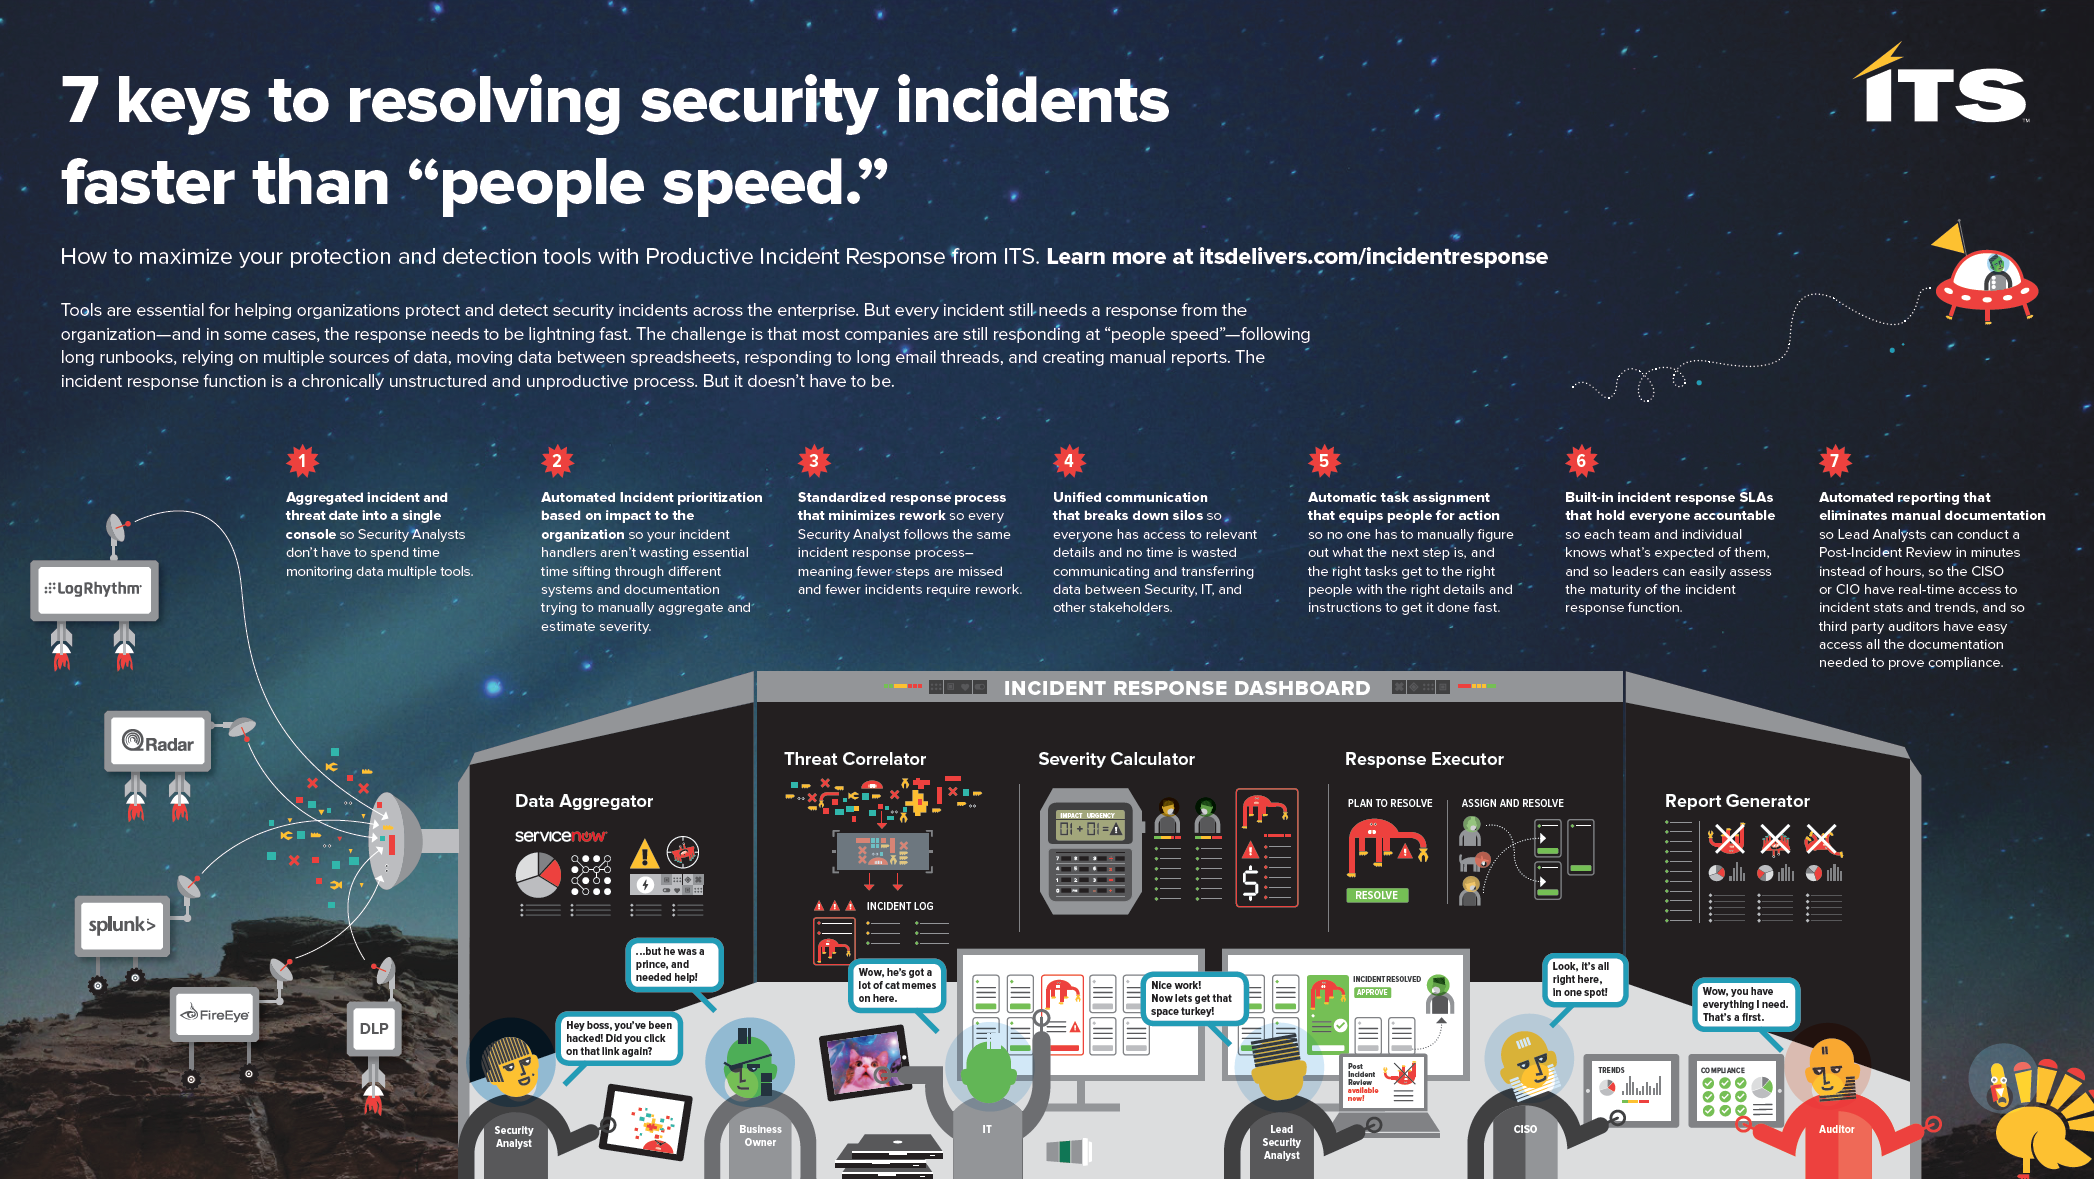 7 Keys to resolving security incidents at people speed